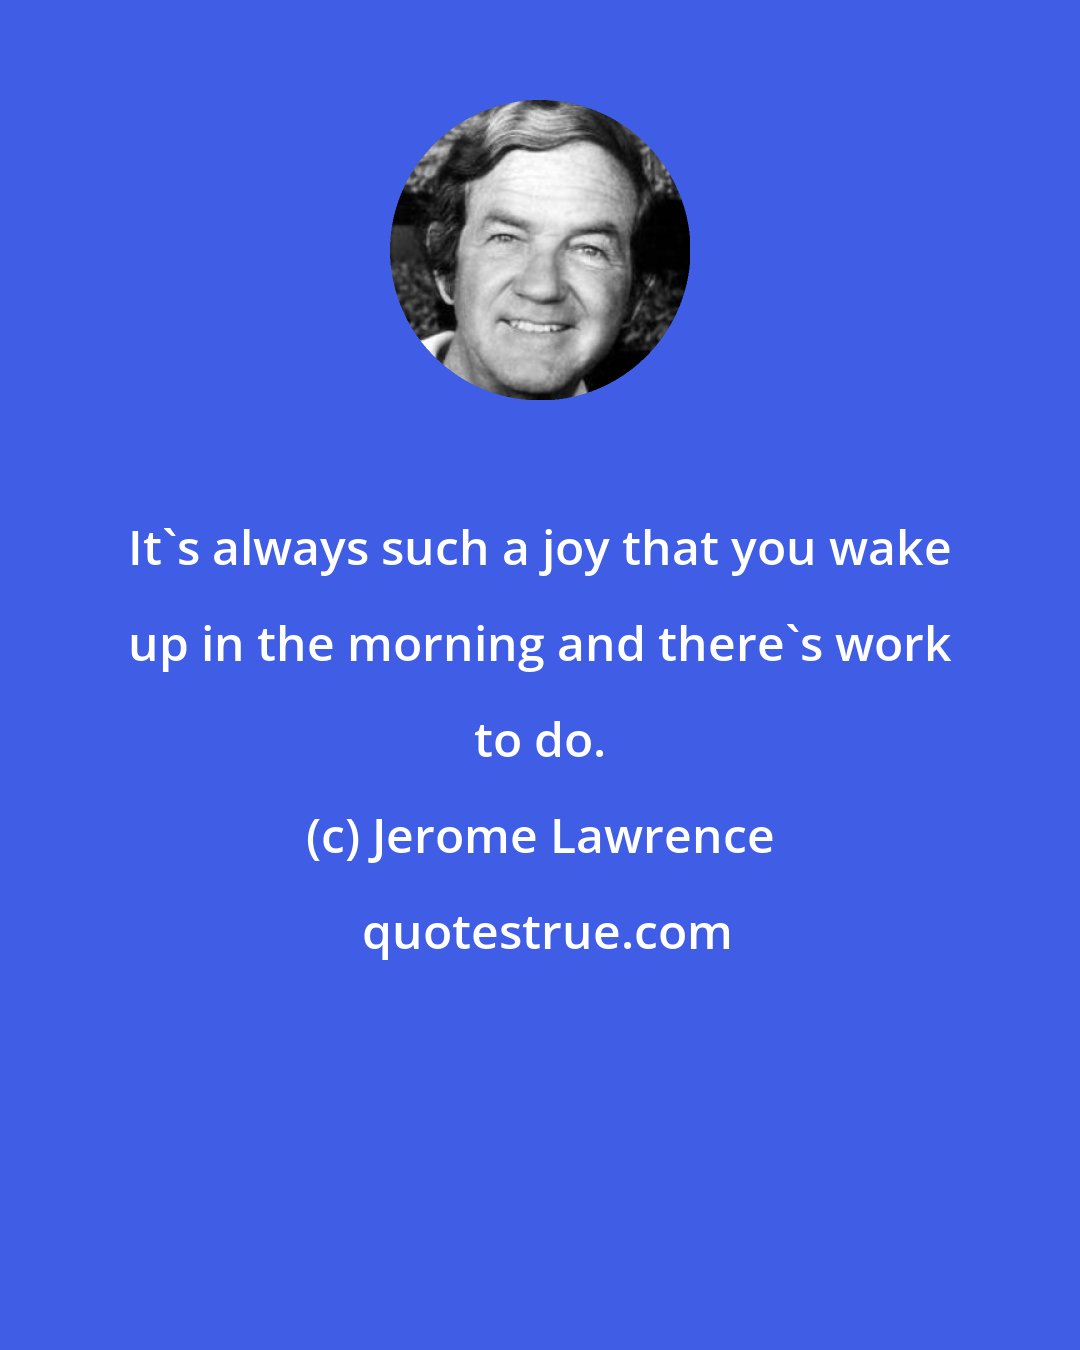 Jerome Lawrence: It's always such a joy that you wake up in the morning and there's work to do.